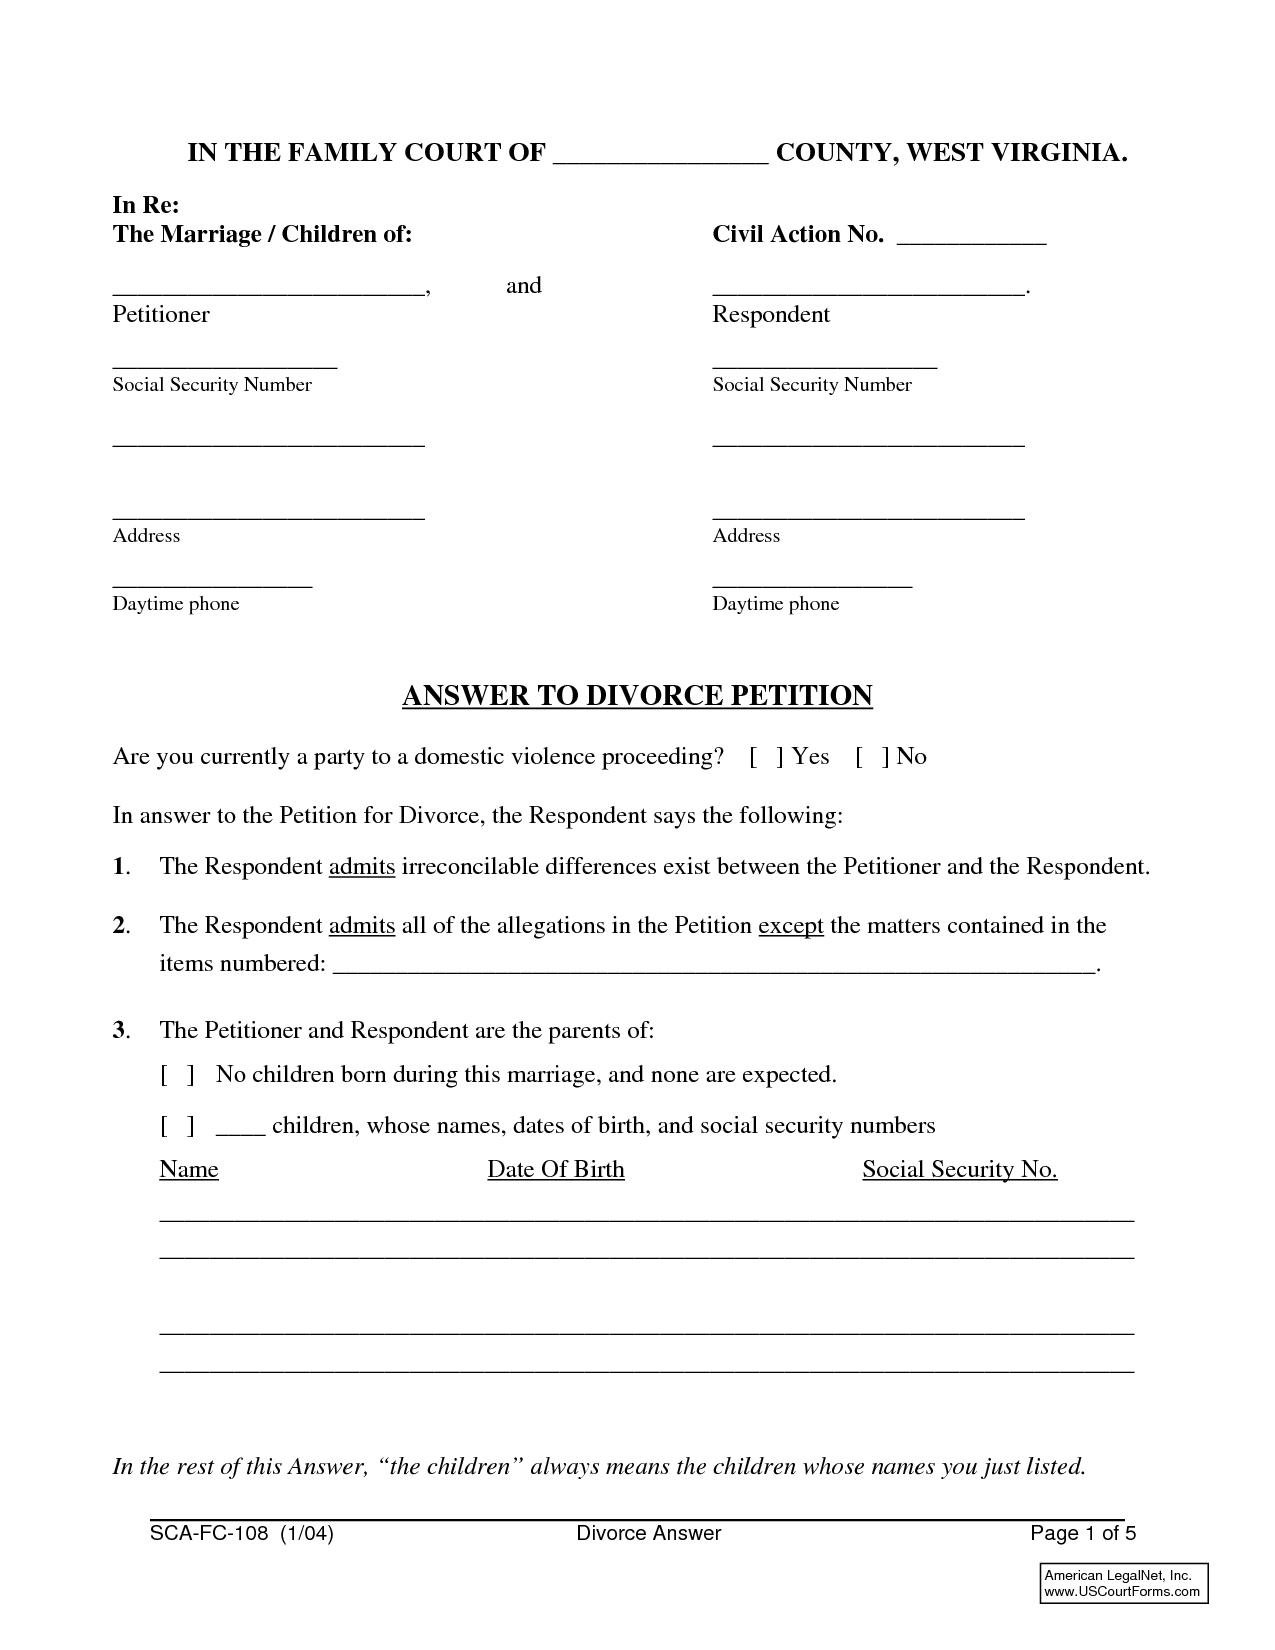 Free Divorce Forms Papers Training Certification Template Pics 